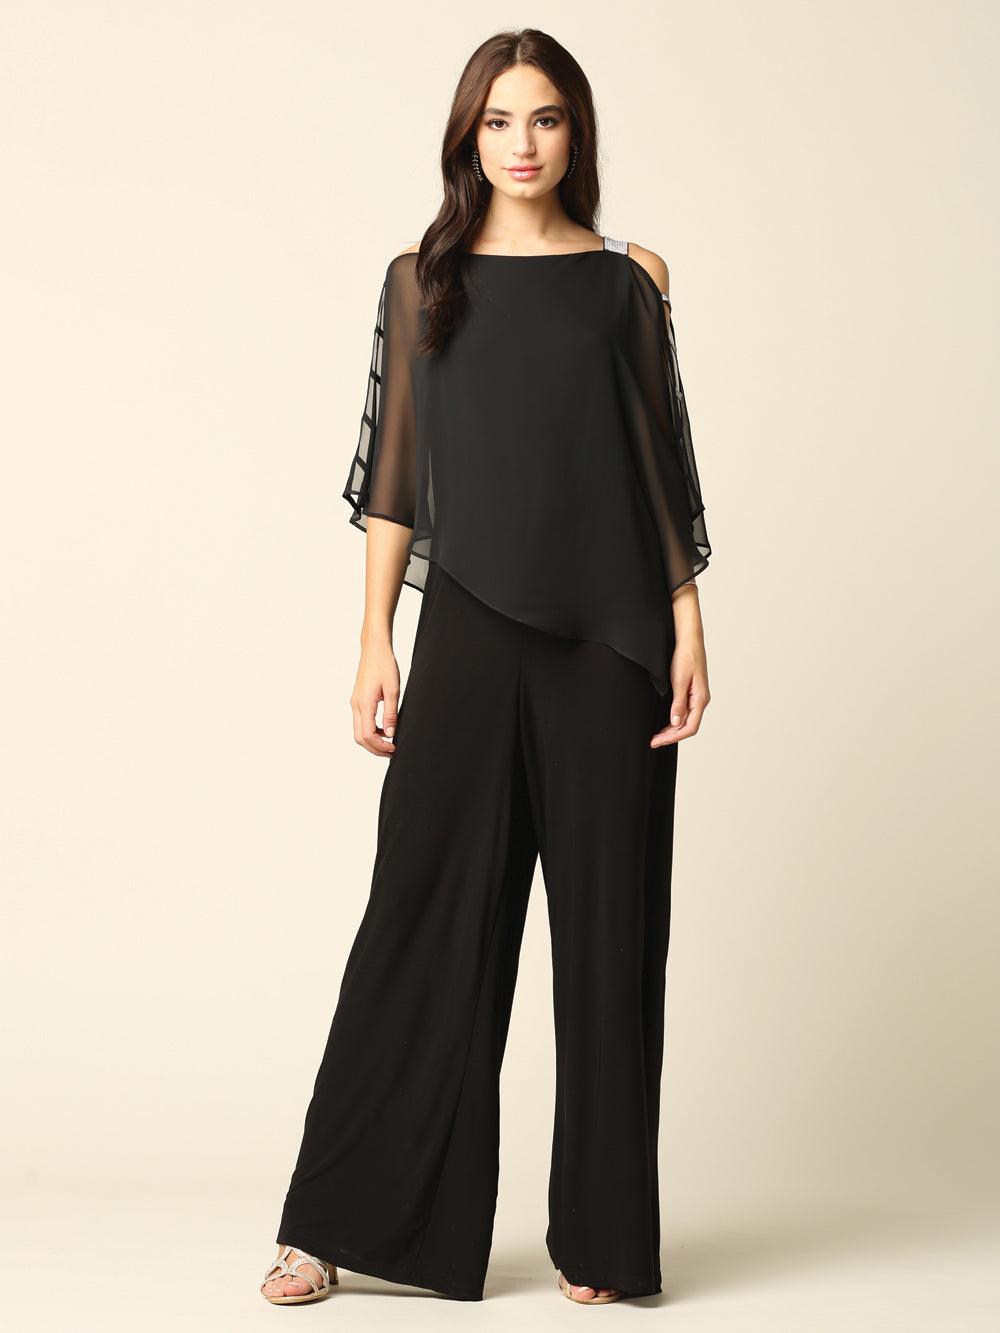 Formal Chiffon Cape Overlay Jumpsuit - The Dress Outlet